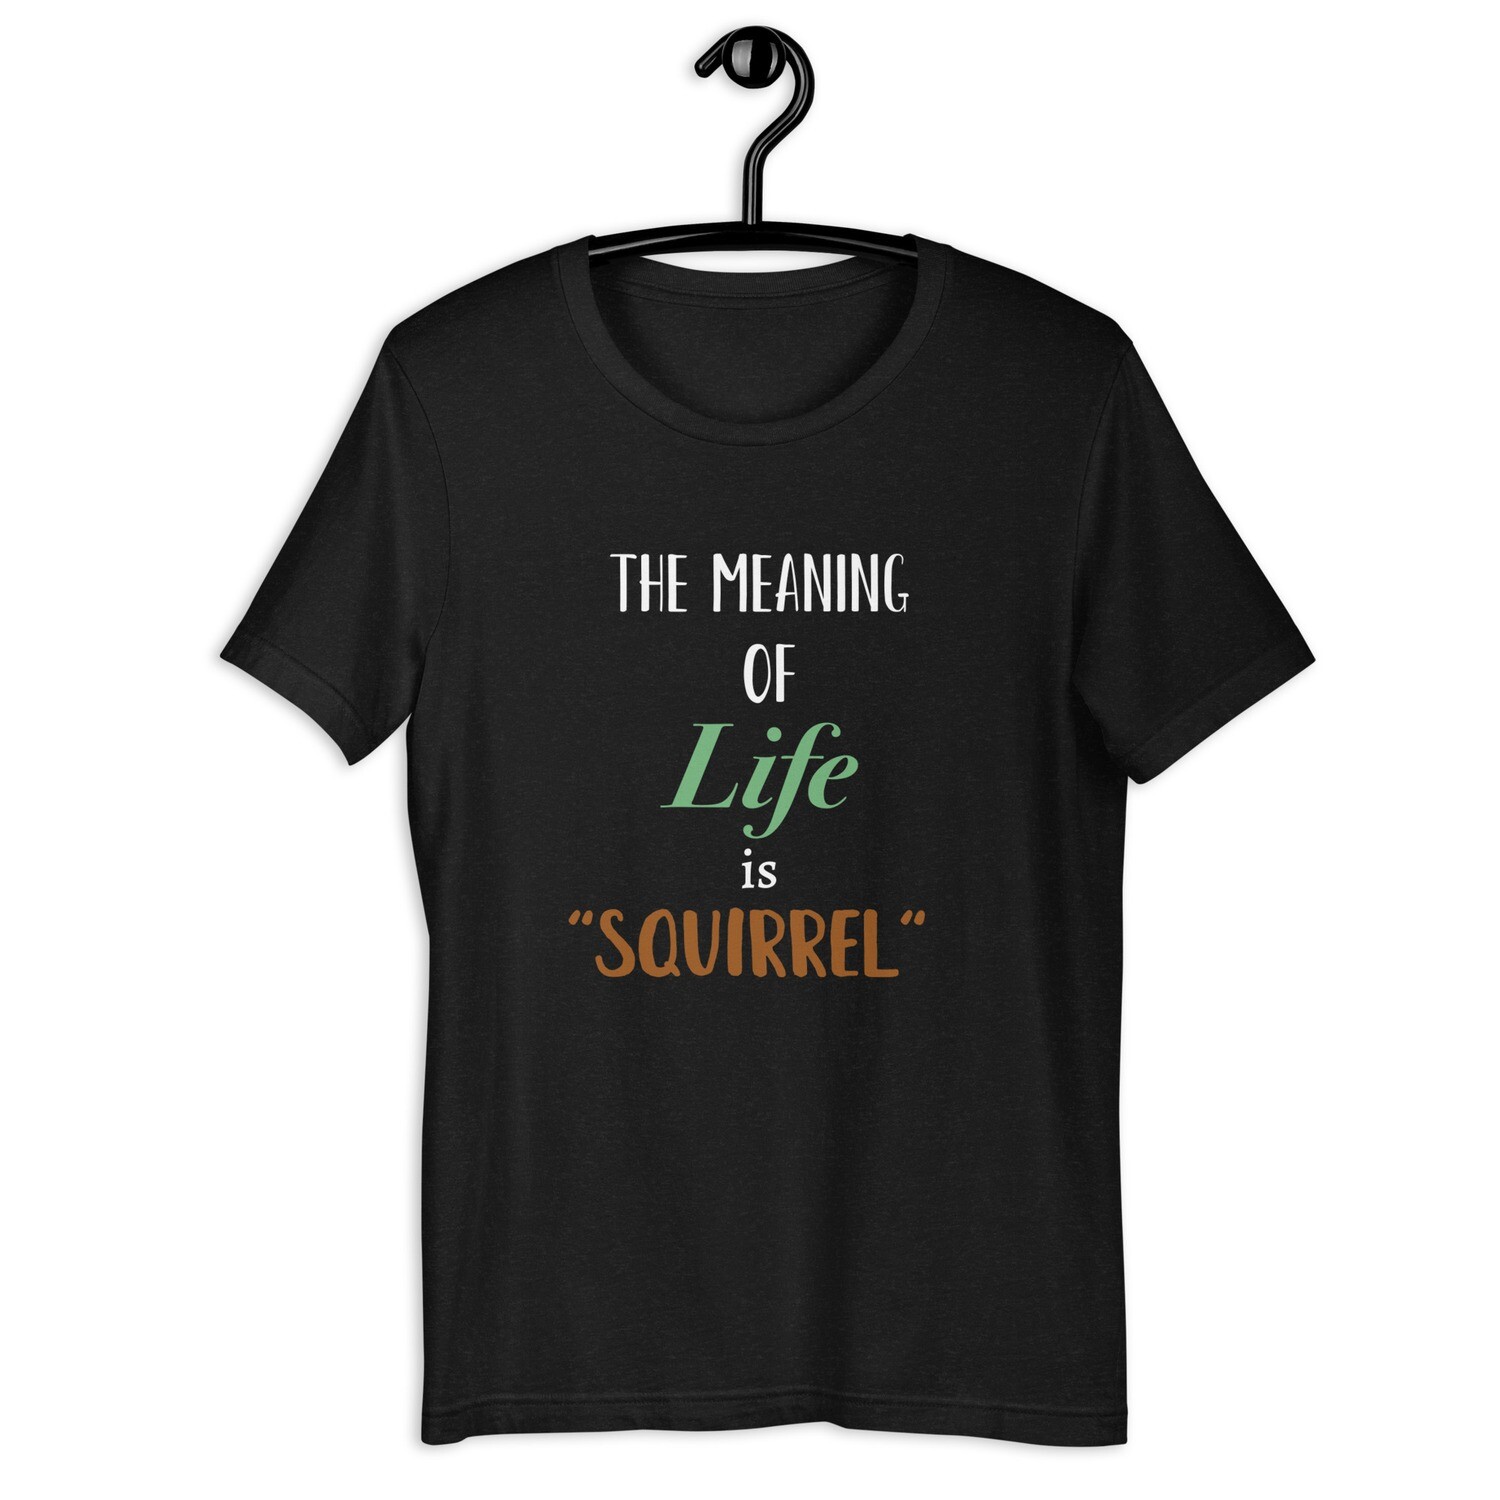 " The meaning of Life is Squrrel" Unisex t-shirt